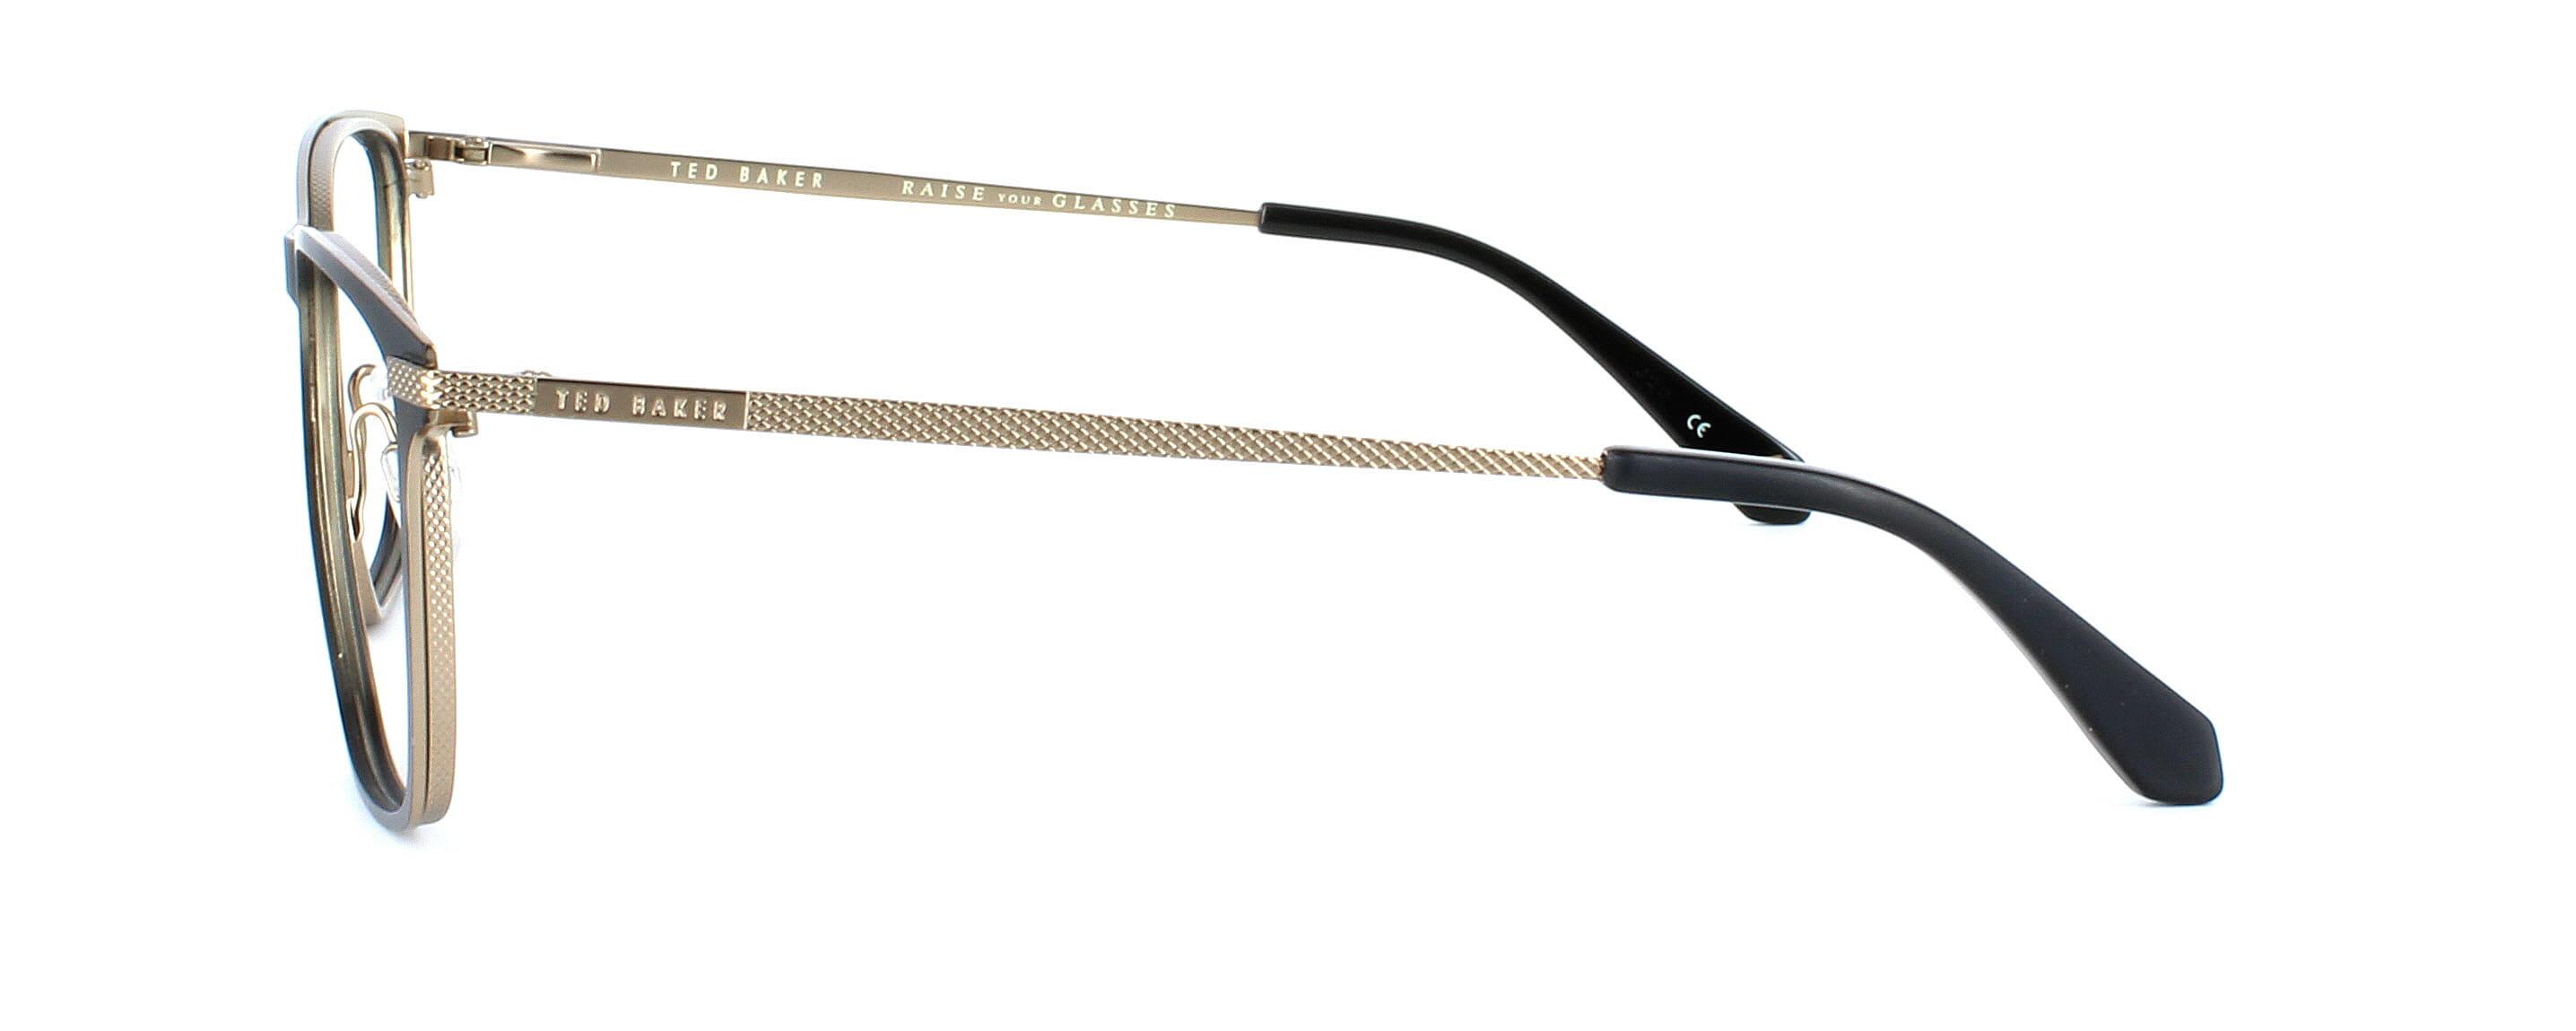 Ted Baker 4276 in black and gold. This is a metal unisex designer frame - image view 2